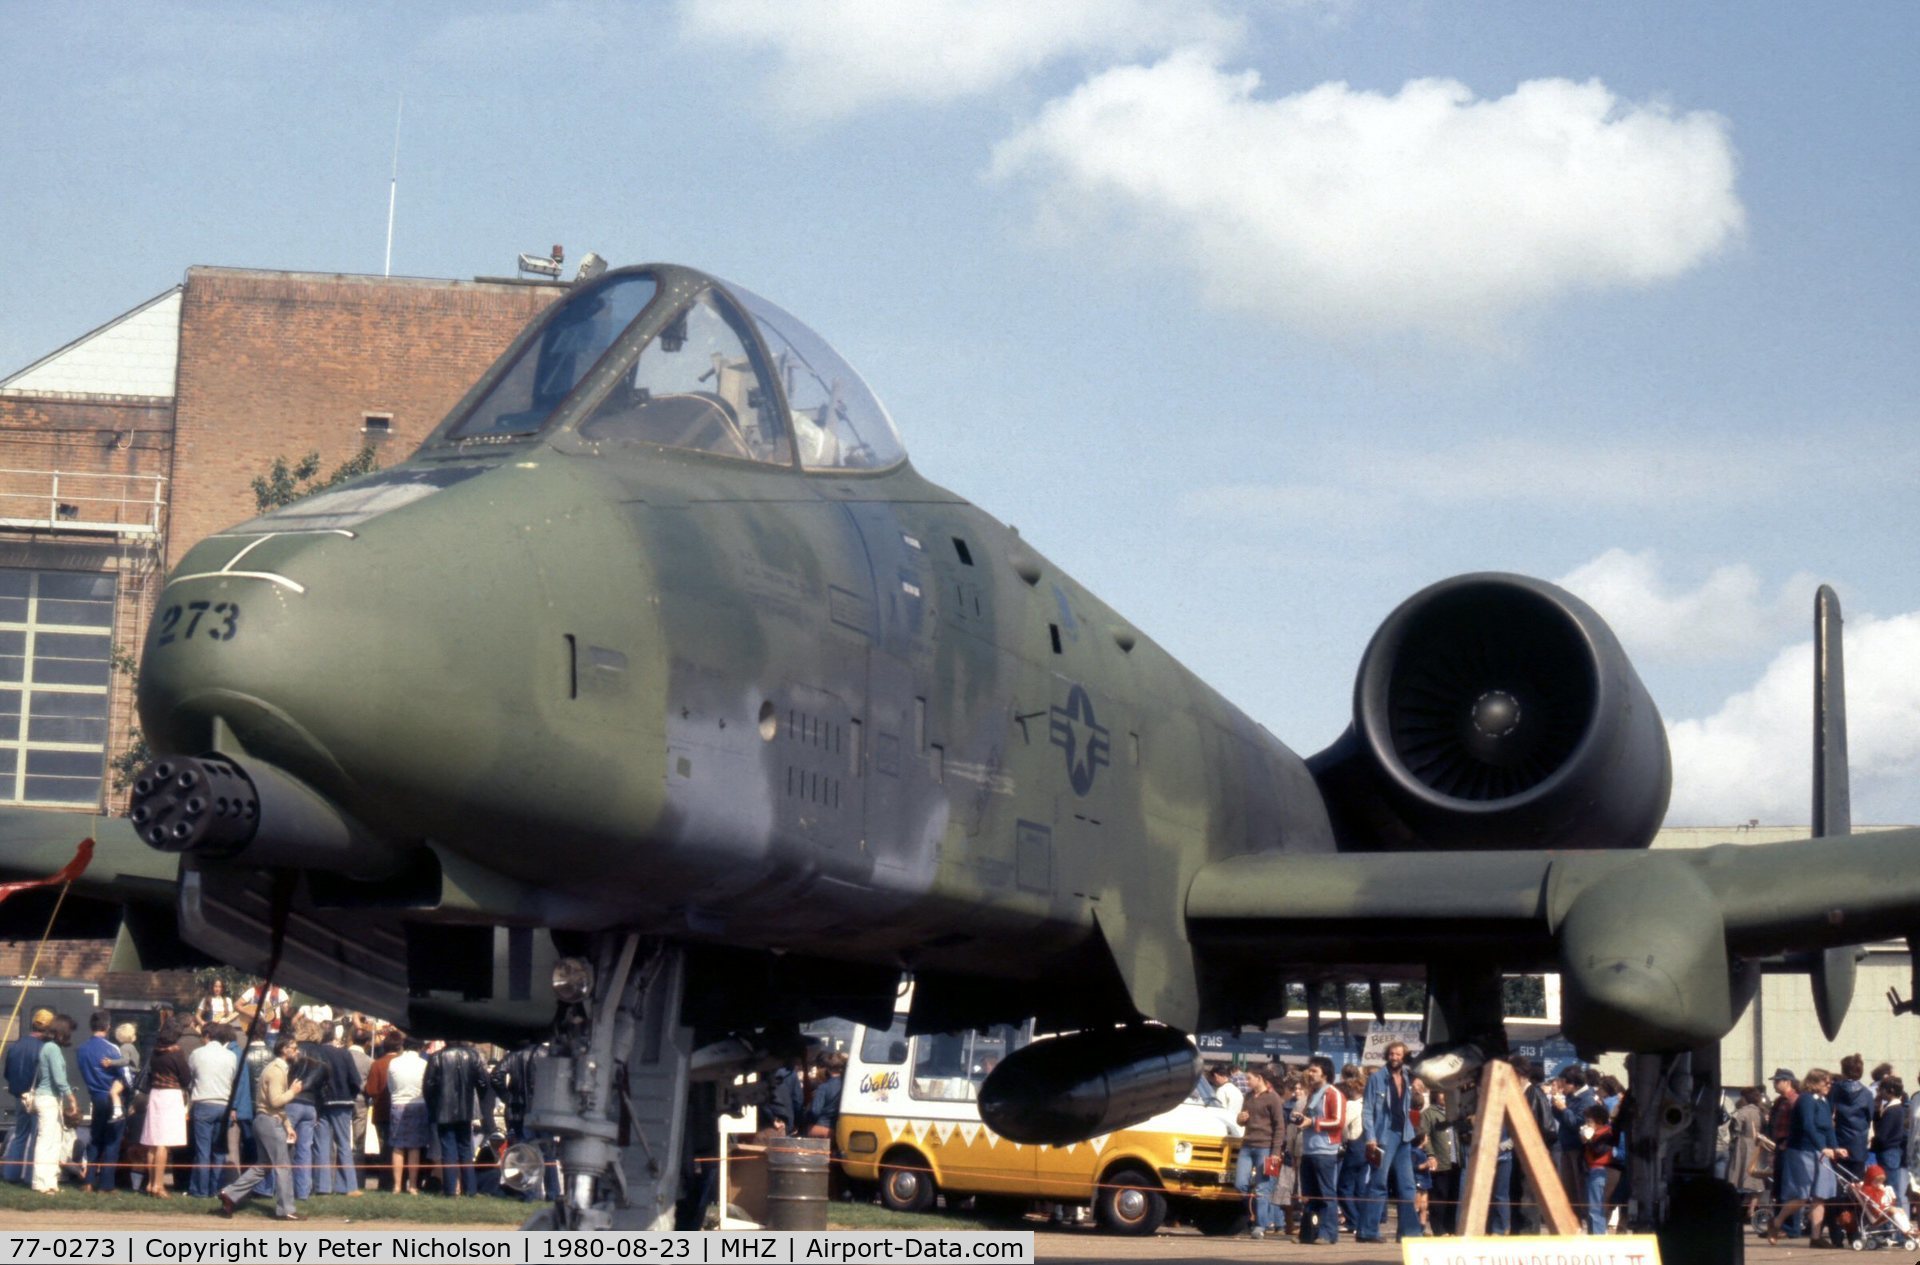 77-0273, 1977 Fairchild Republic A-10A Thunderbolt II C/N A10-0198, Another view of the 91 TFS/81 TFW Thunderbolt on display at the 1980 Mildenhall Air Fete.